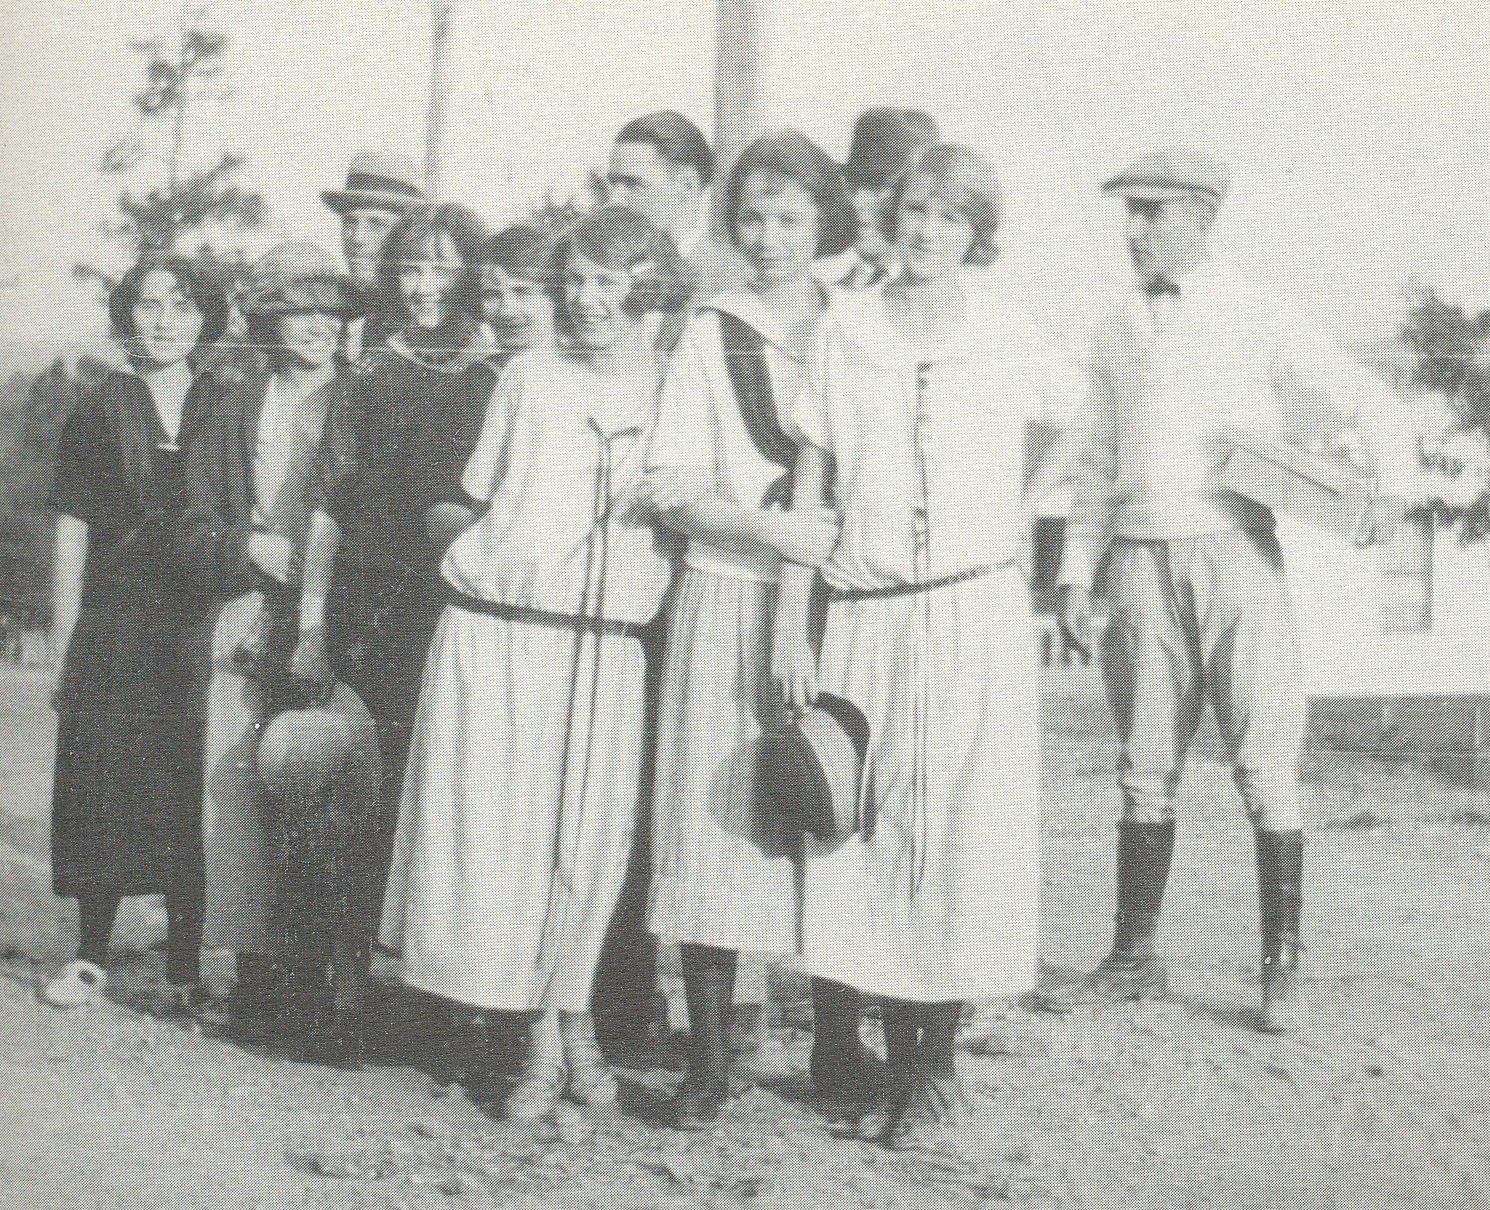 SHADES CAHABA STUDENTS IN 1925 STANDING AT THE CORNER OF HWY. 31 AND SAULTER ROAD.(Click to enlarge.)